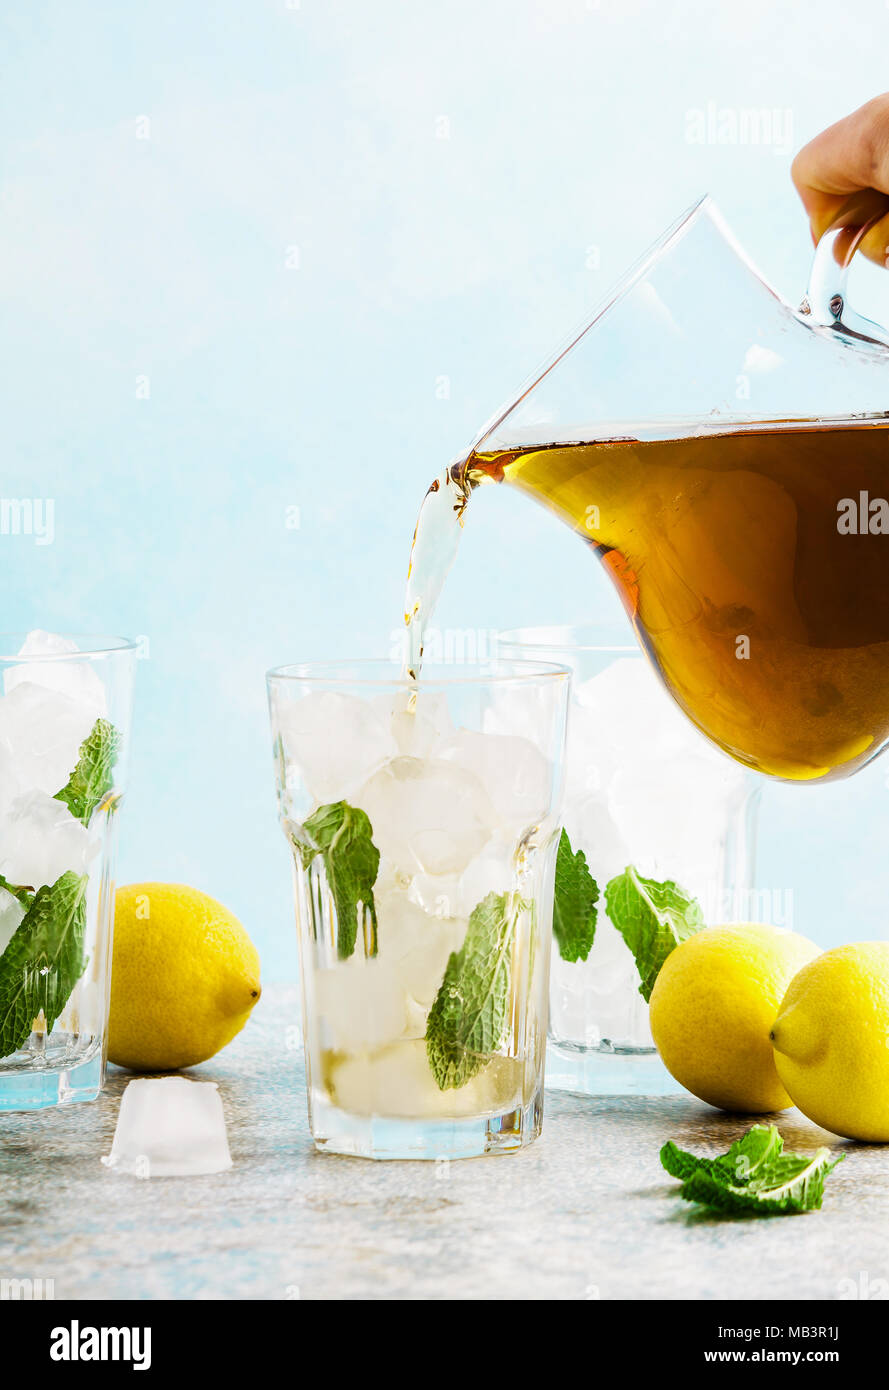 https://c8.alamy.com/comp/MB3R1J/pour-from-pitcher-traditional-iced-tea-with-lemon-and-ice-in-tall-glasses-MB3R1J.jpg